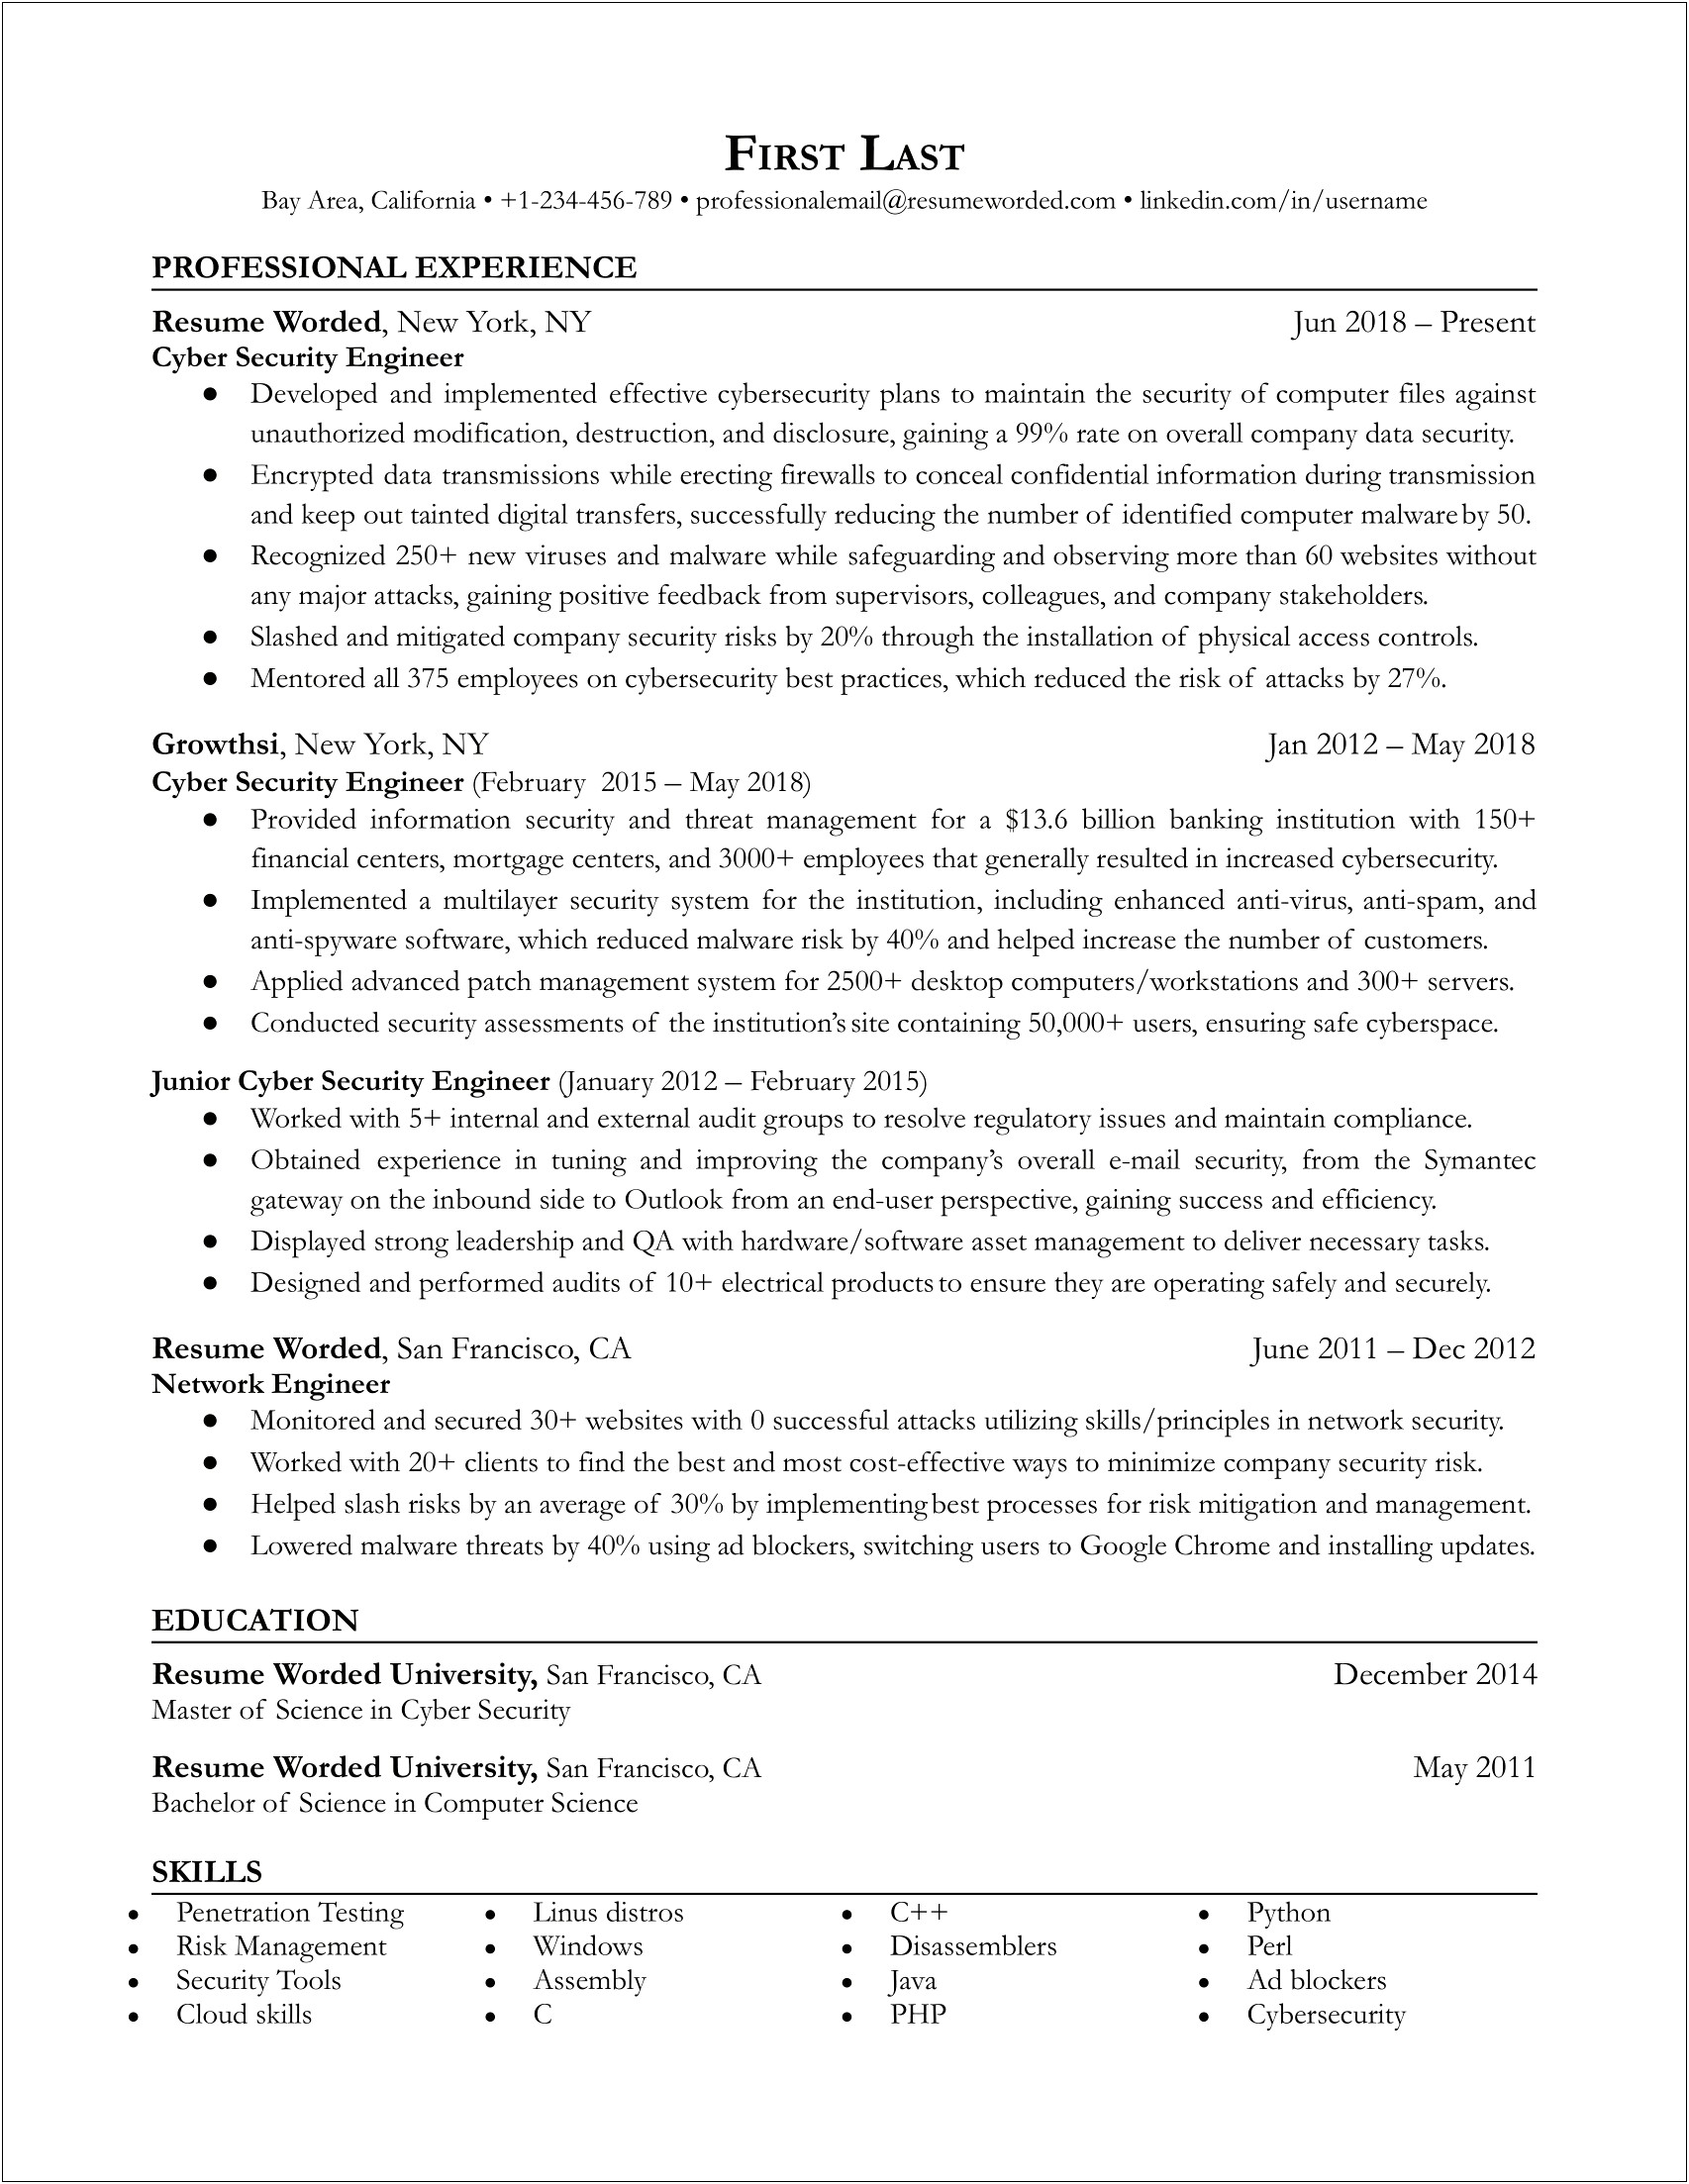 Cyber Security Skills For Resume